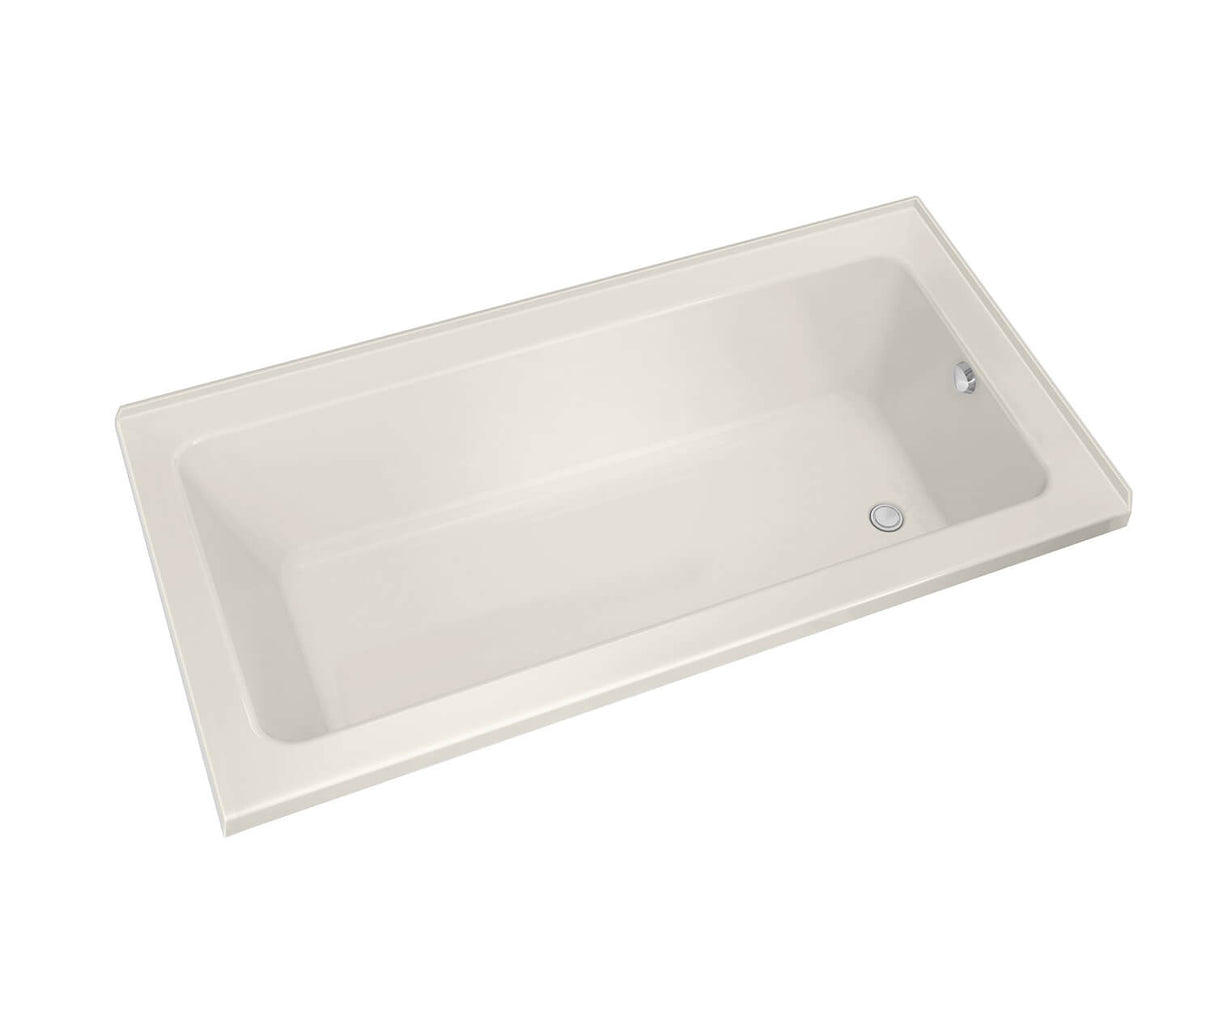 MAAX 106206-L-103-007 Pose 6632 IF Acrylic Corner Right Left-Hand Drain Aeroeffect Bathtub in Biscuit